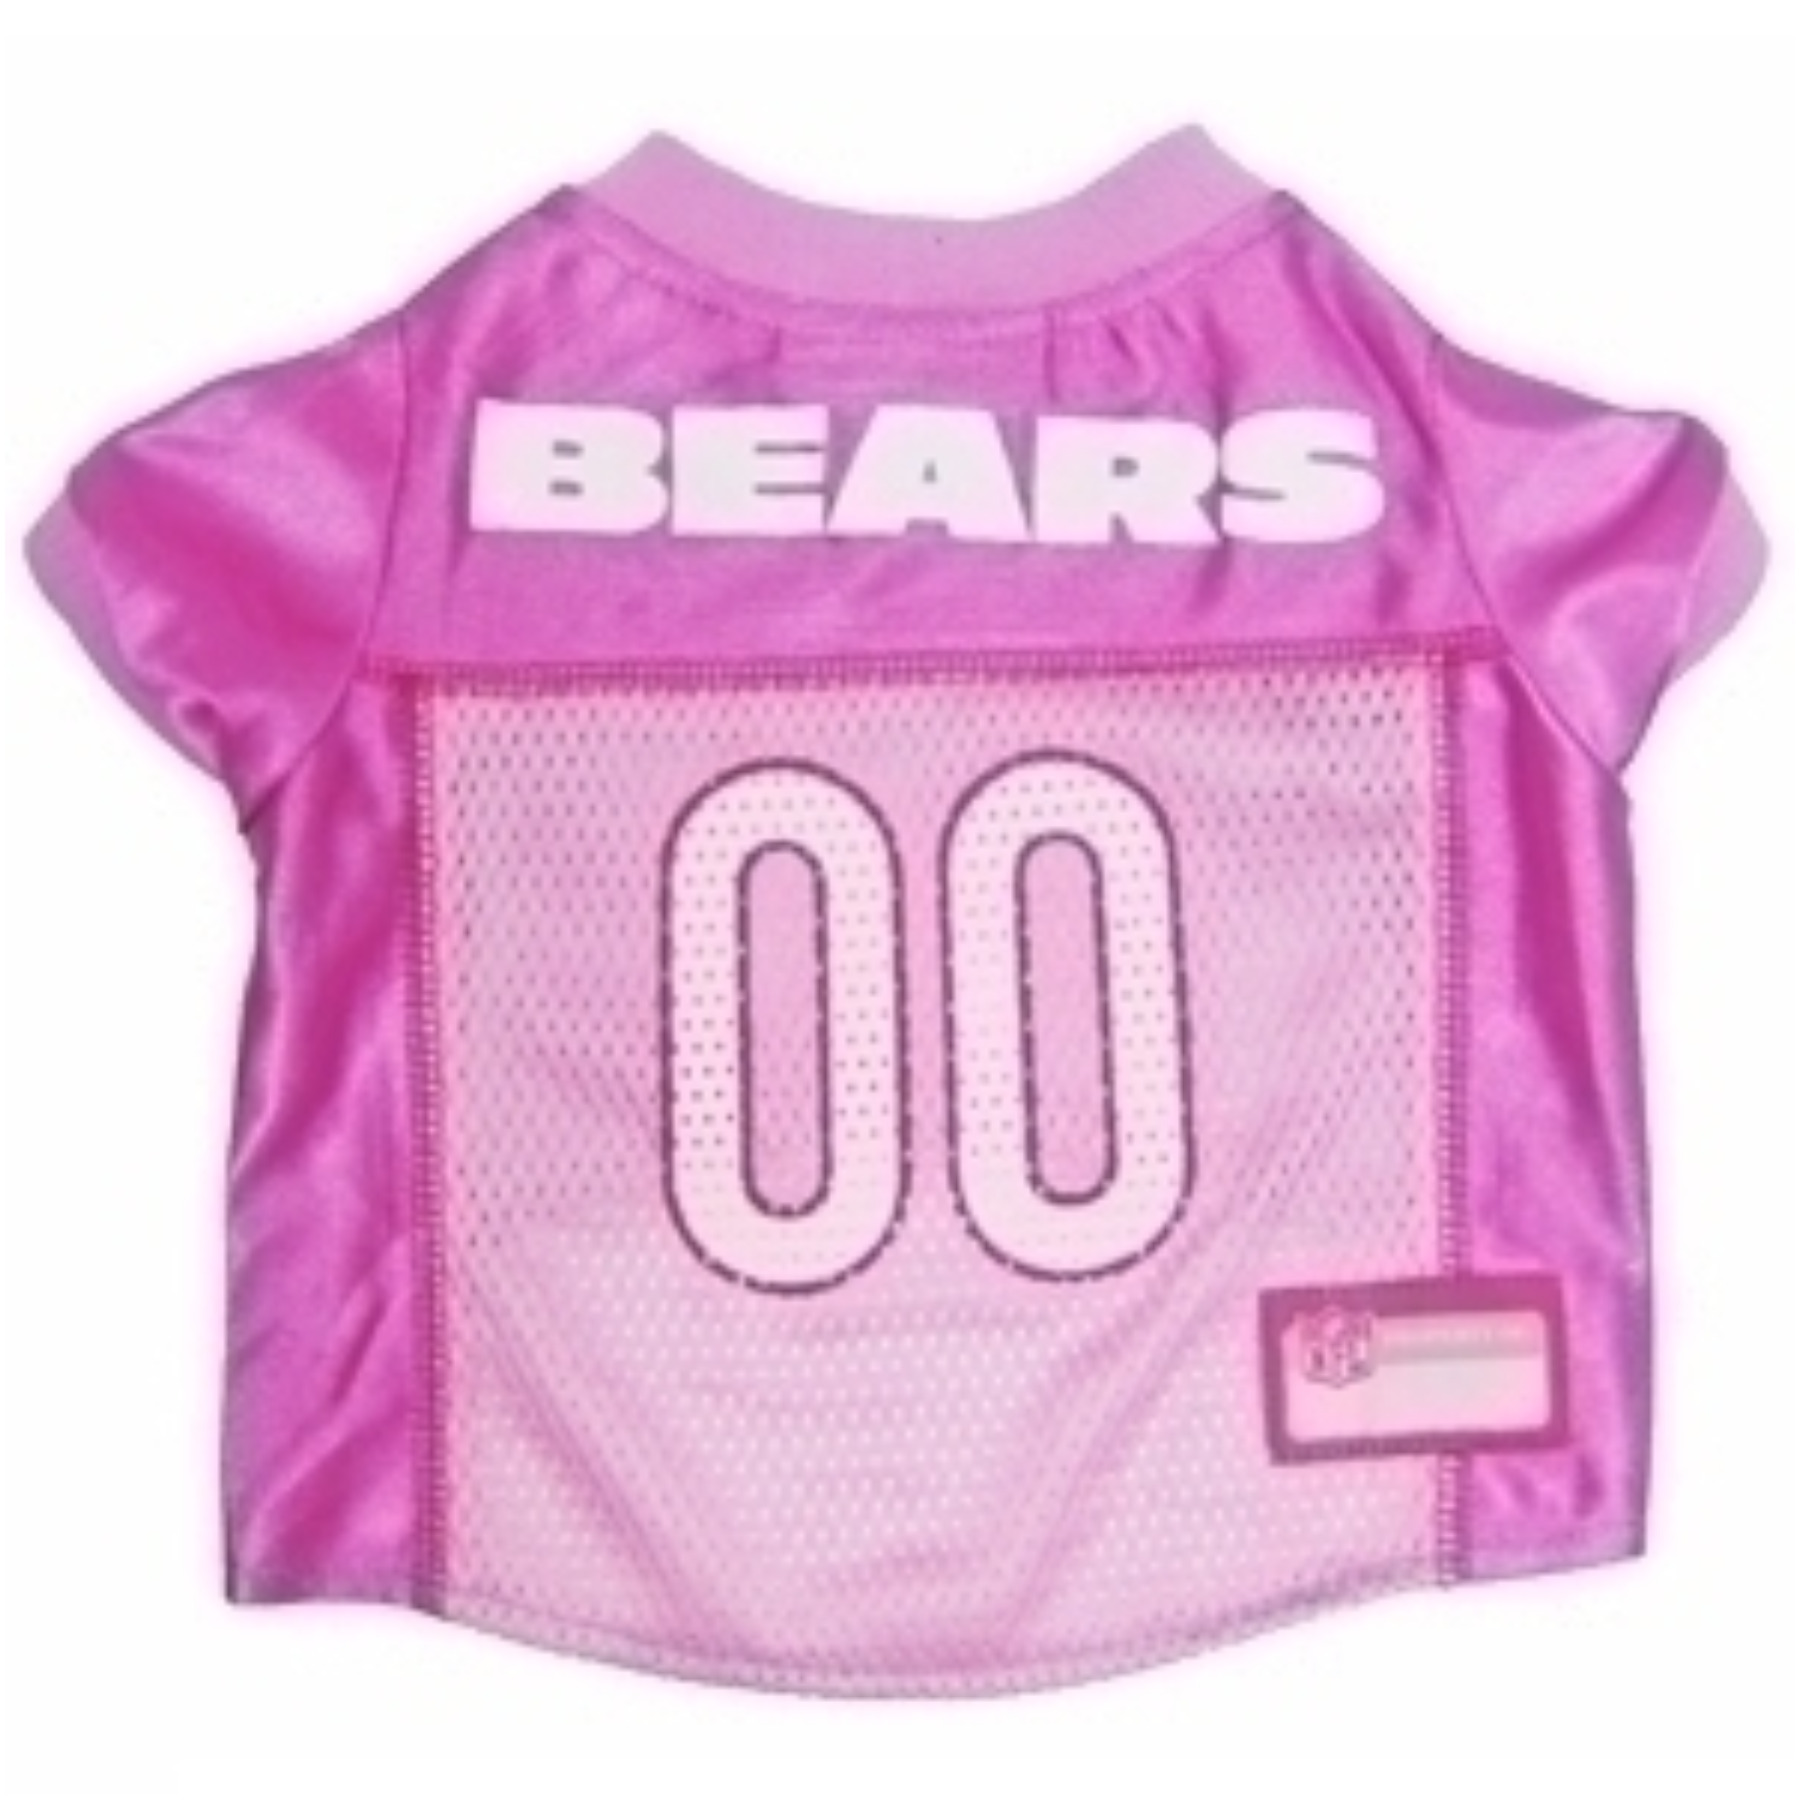 Chicago Bears Dog Jersey - Pink